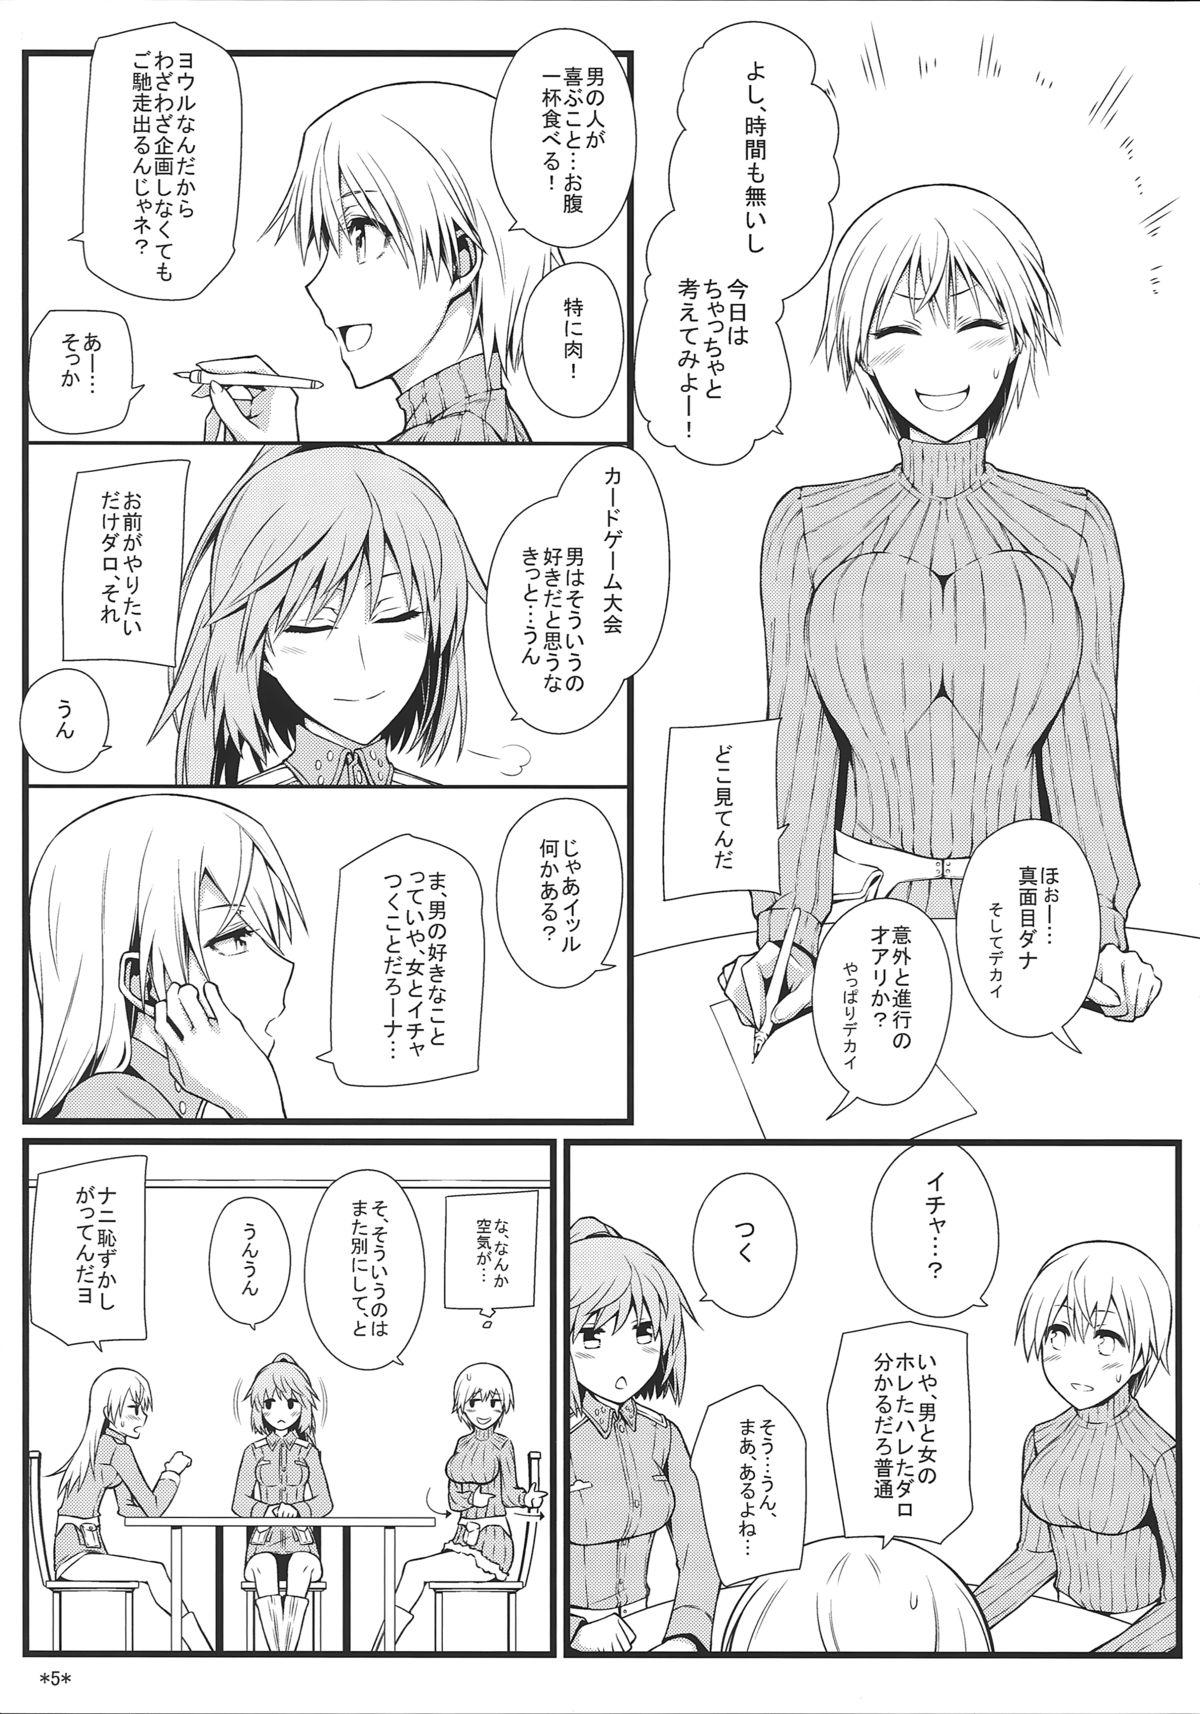 Camgirl KARLSLAND SYNDROME 3 - Strike witches Brazil - Page 7